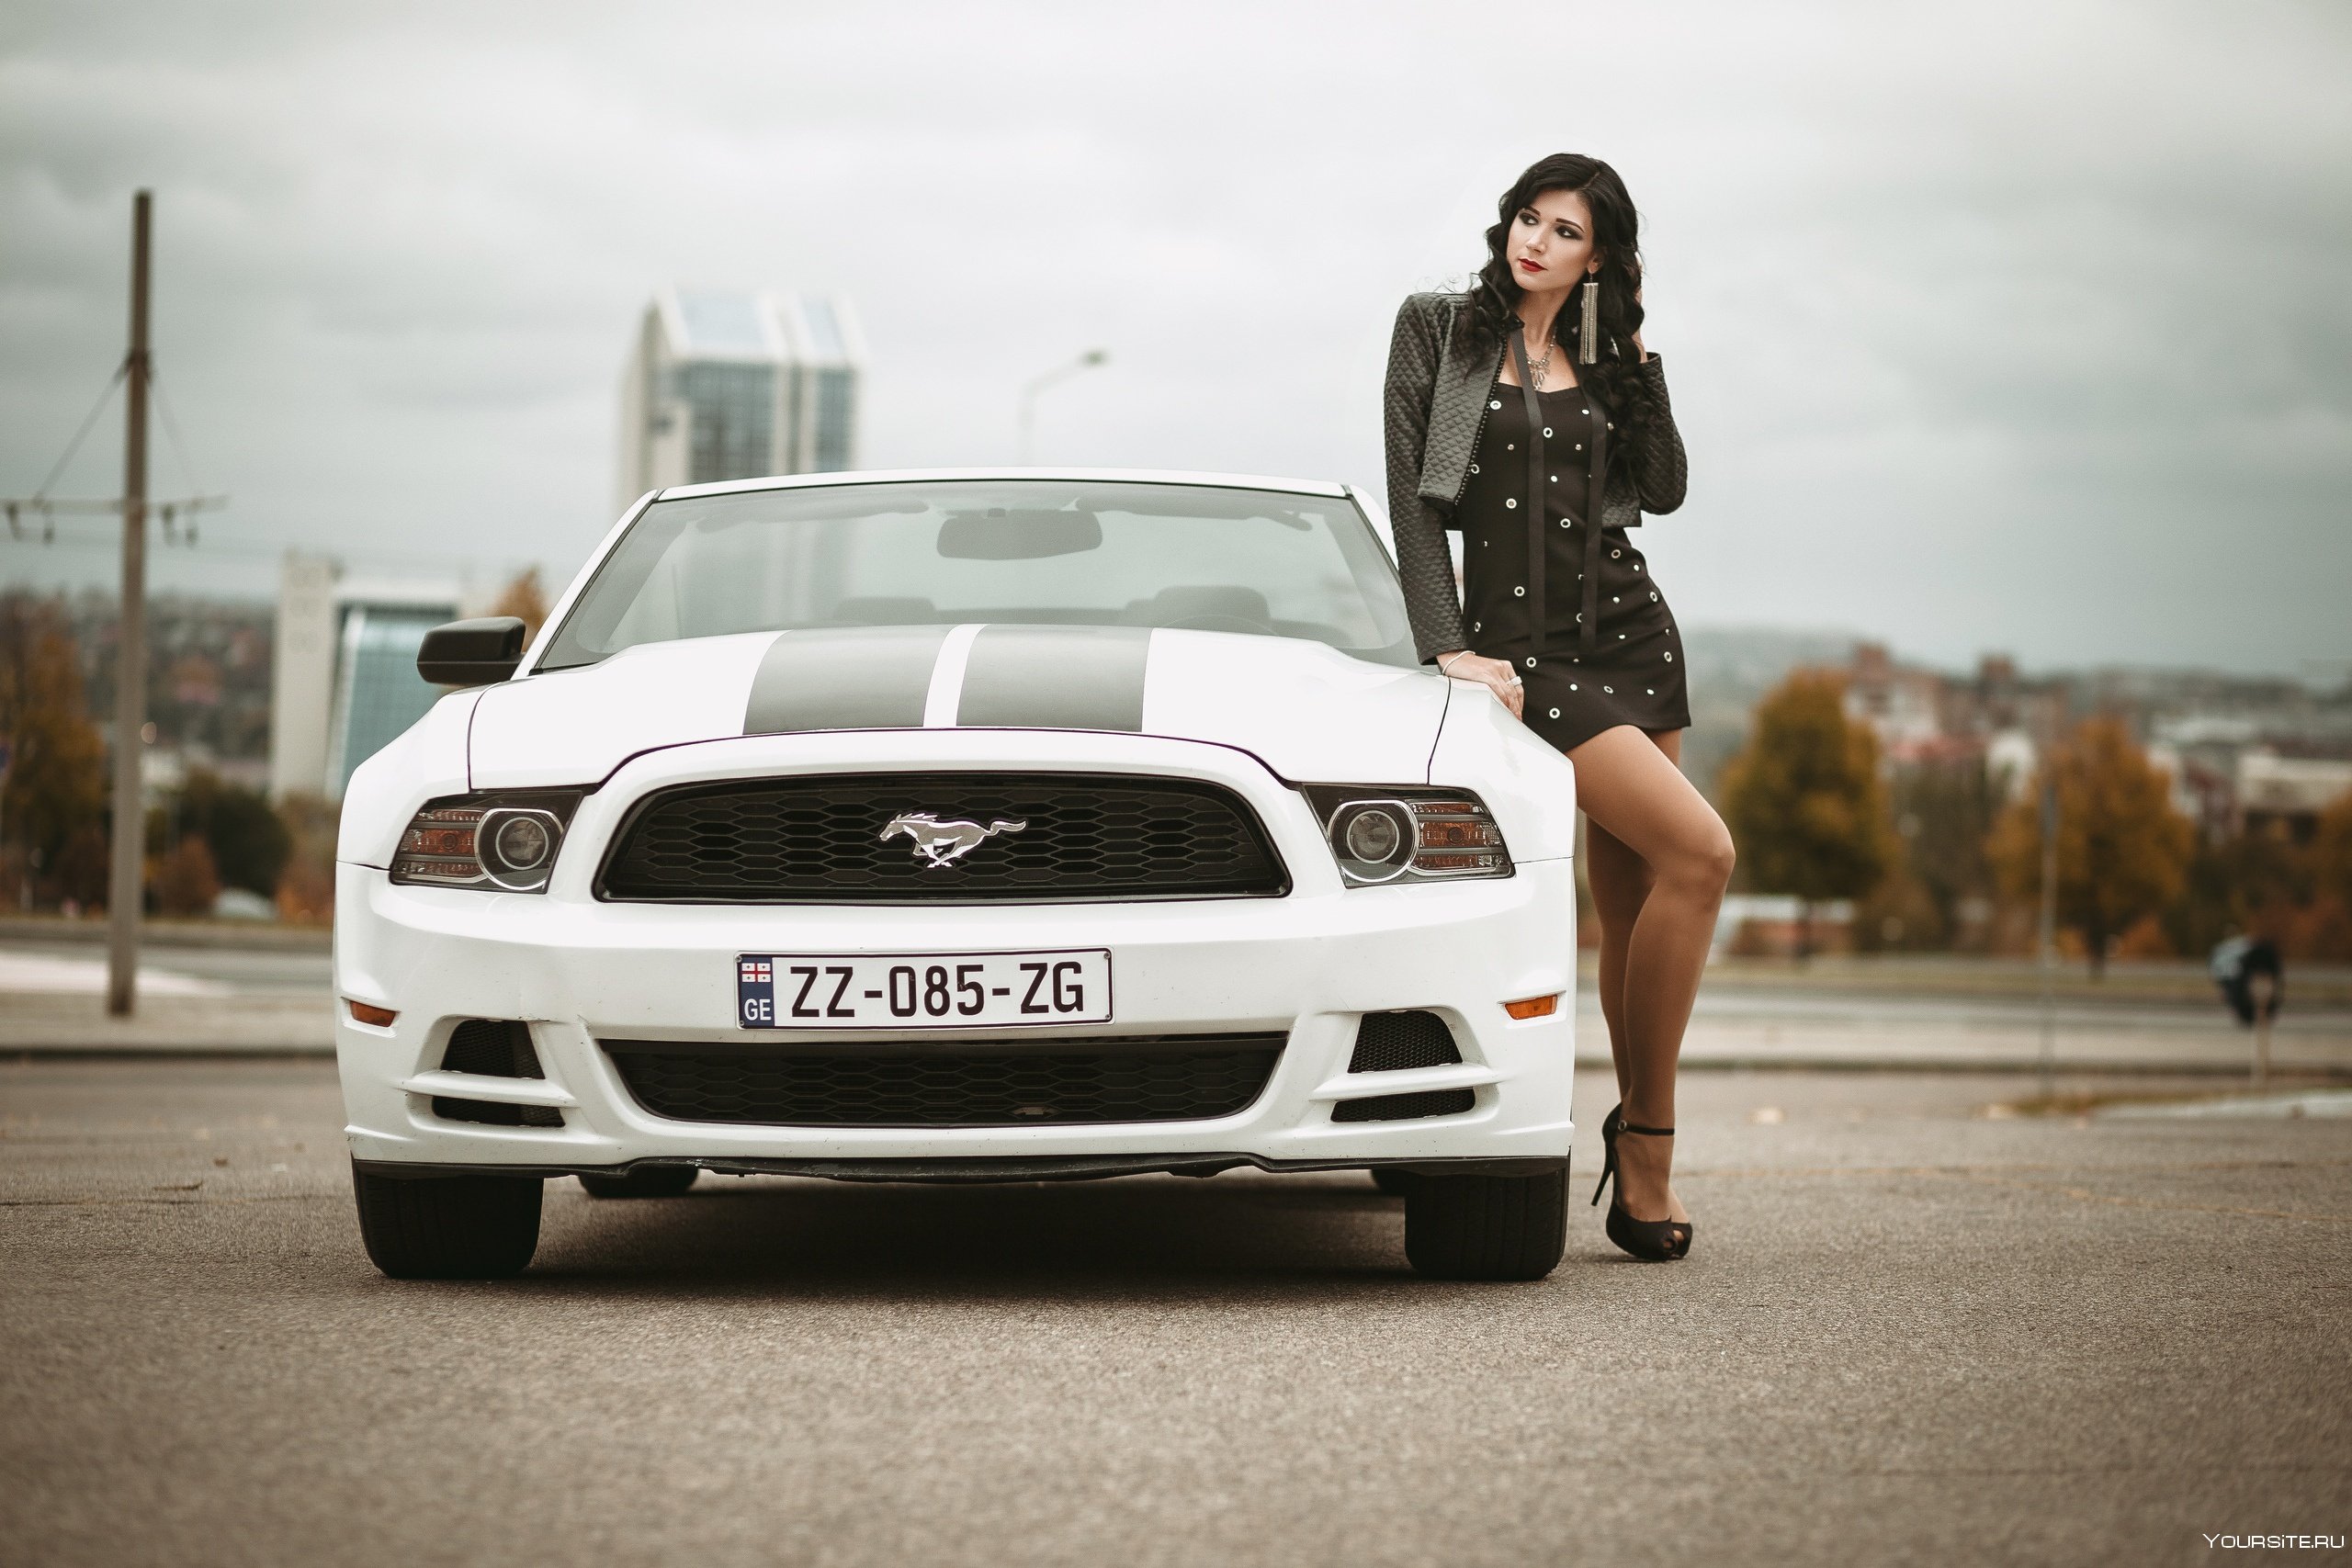 One of the girls streets white mustang